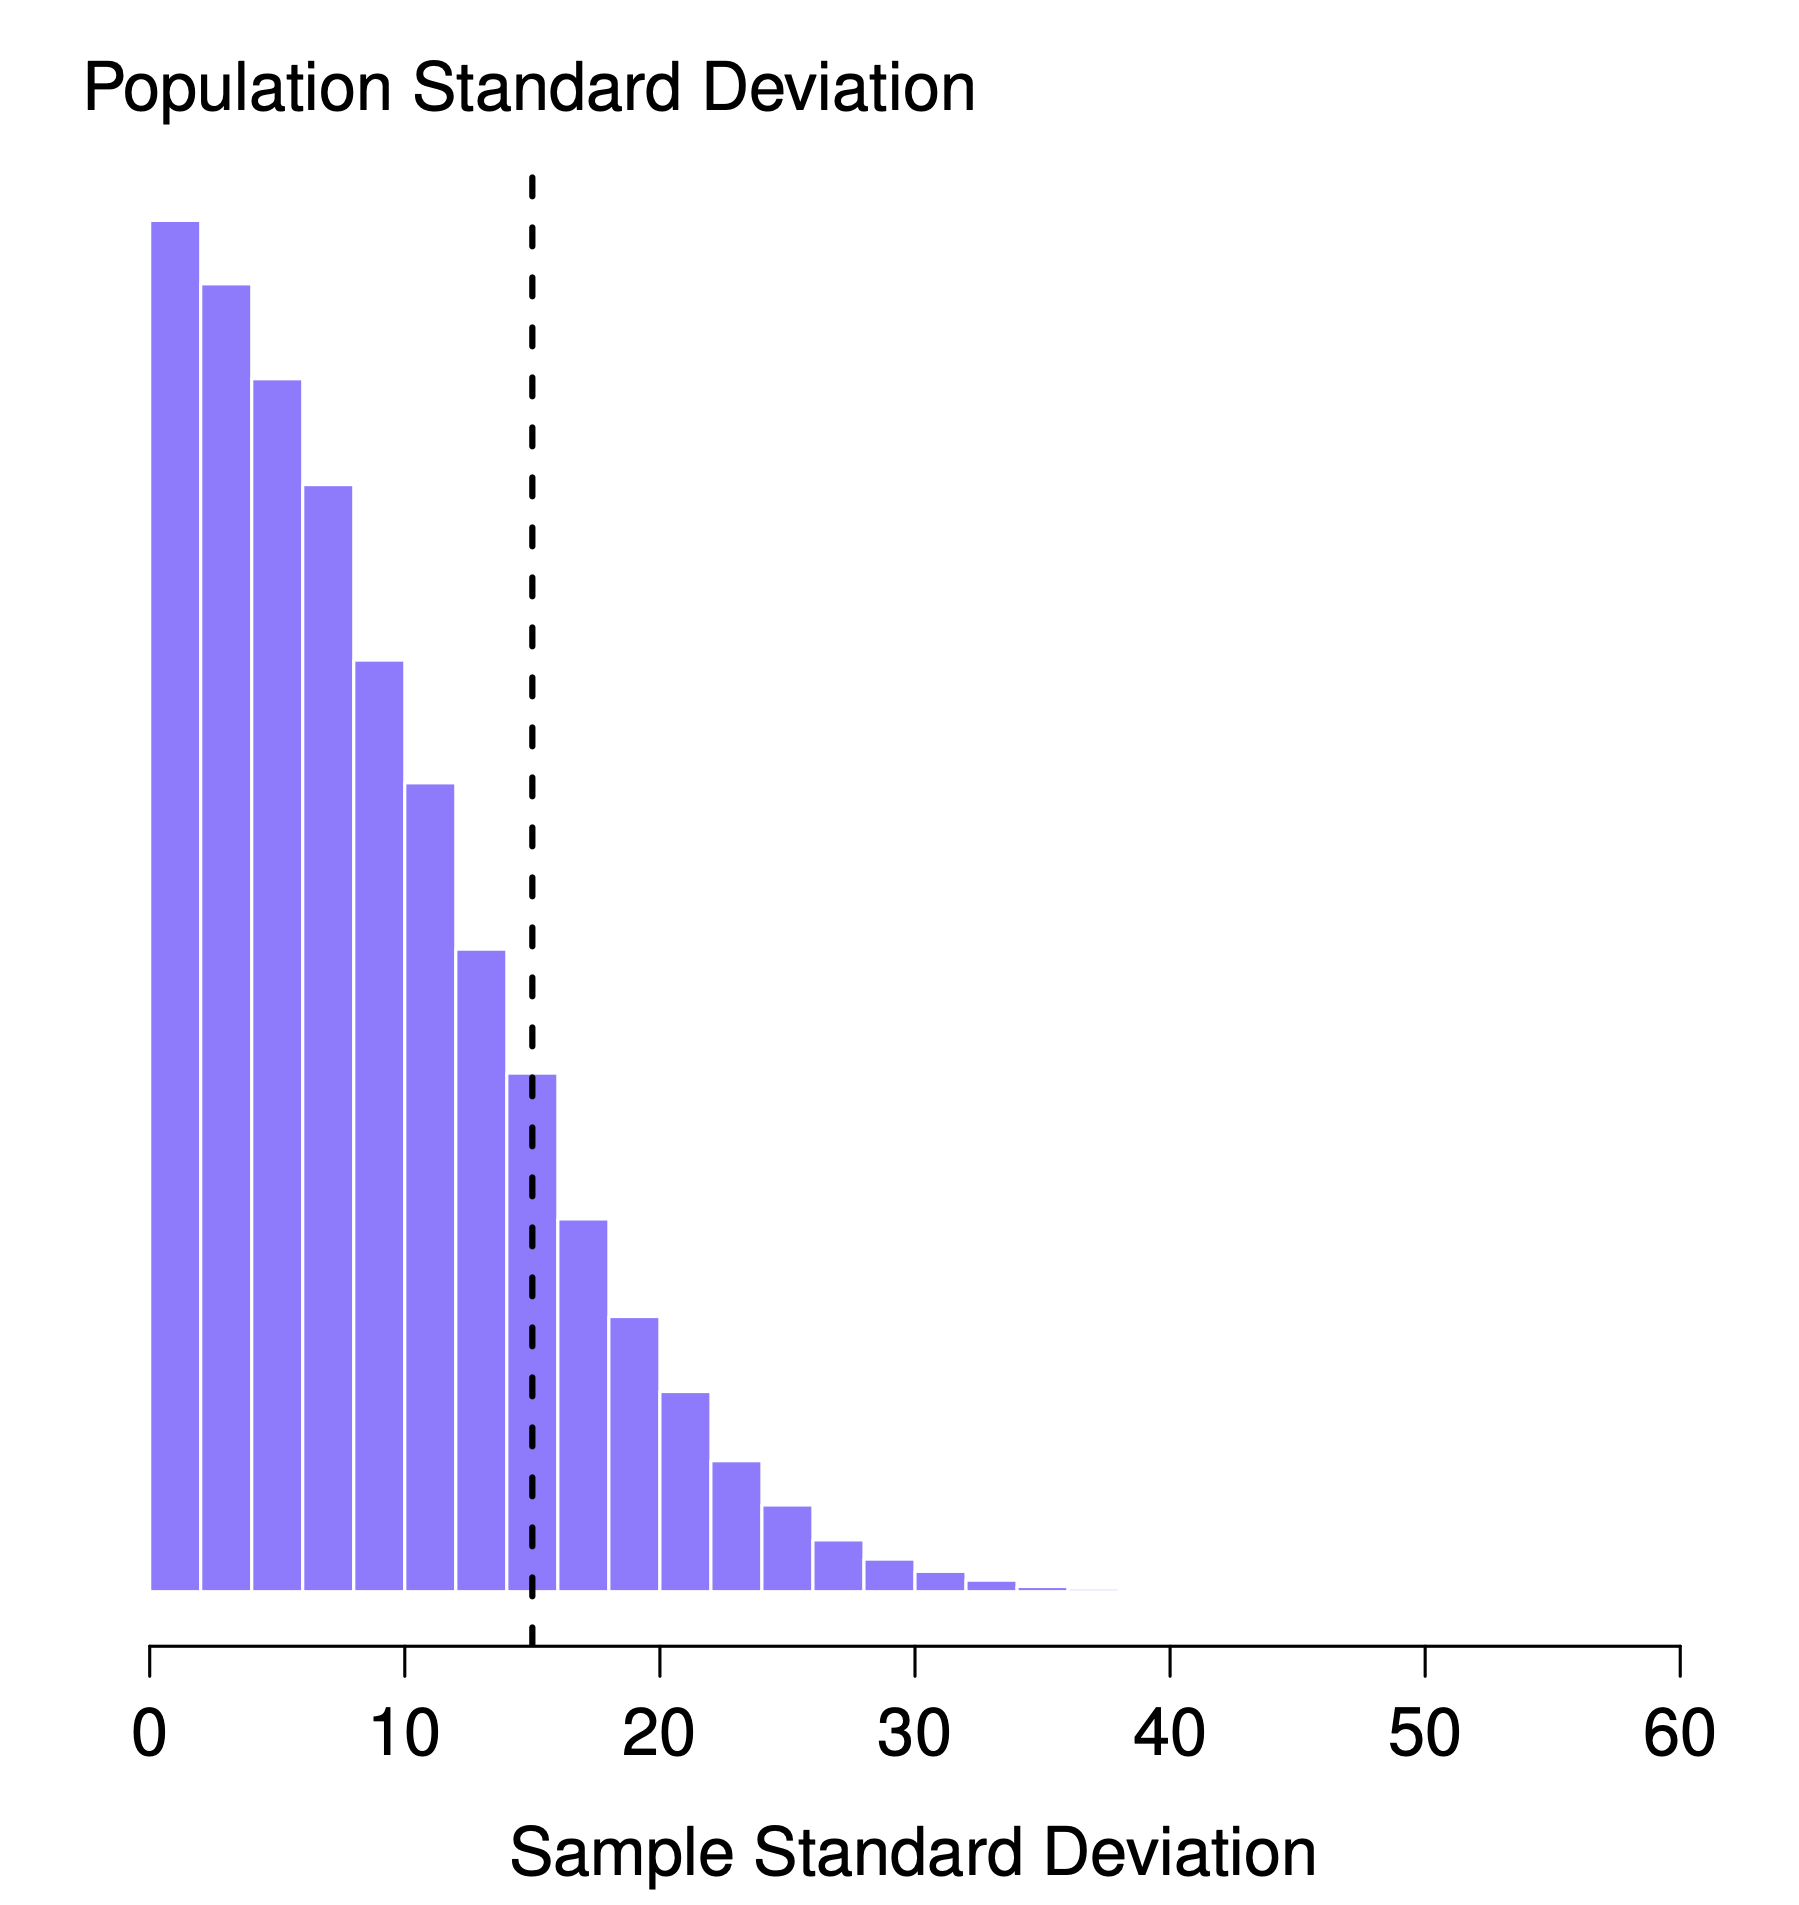 The sampling distribution of the sample standard deviation for a “two IQ scores” experiment. The true population standard deviation is 15 (dashed line), but as you can see from the histogram, the vast majority of experiments will produce a much smaller sample standard deviation than this. On average, this experiment would produce a sample standard deviation of only 8.5, well below the true value! In other words, the sample standard deviation is a biased estimate of the population standard deviation.